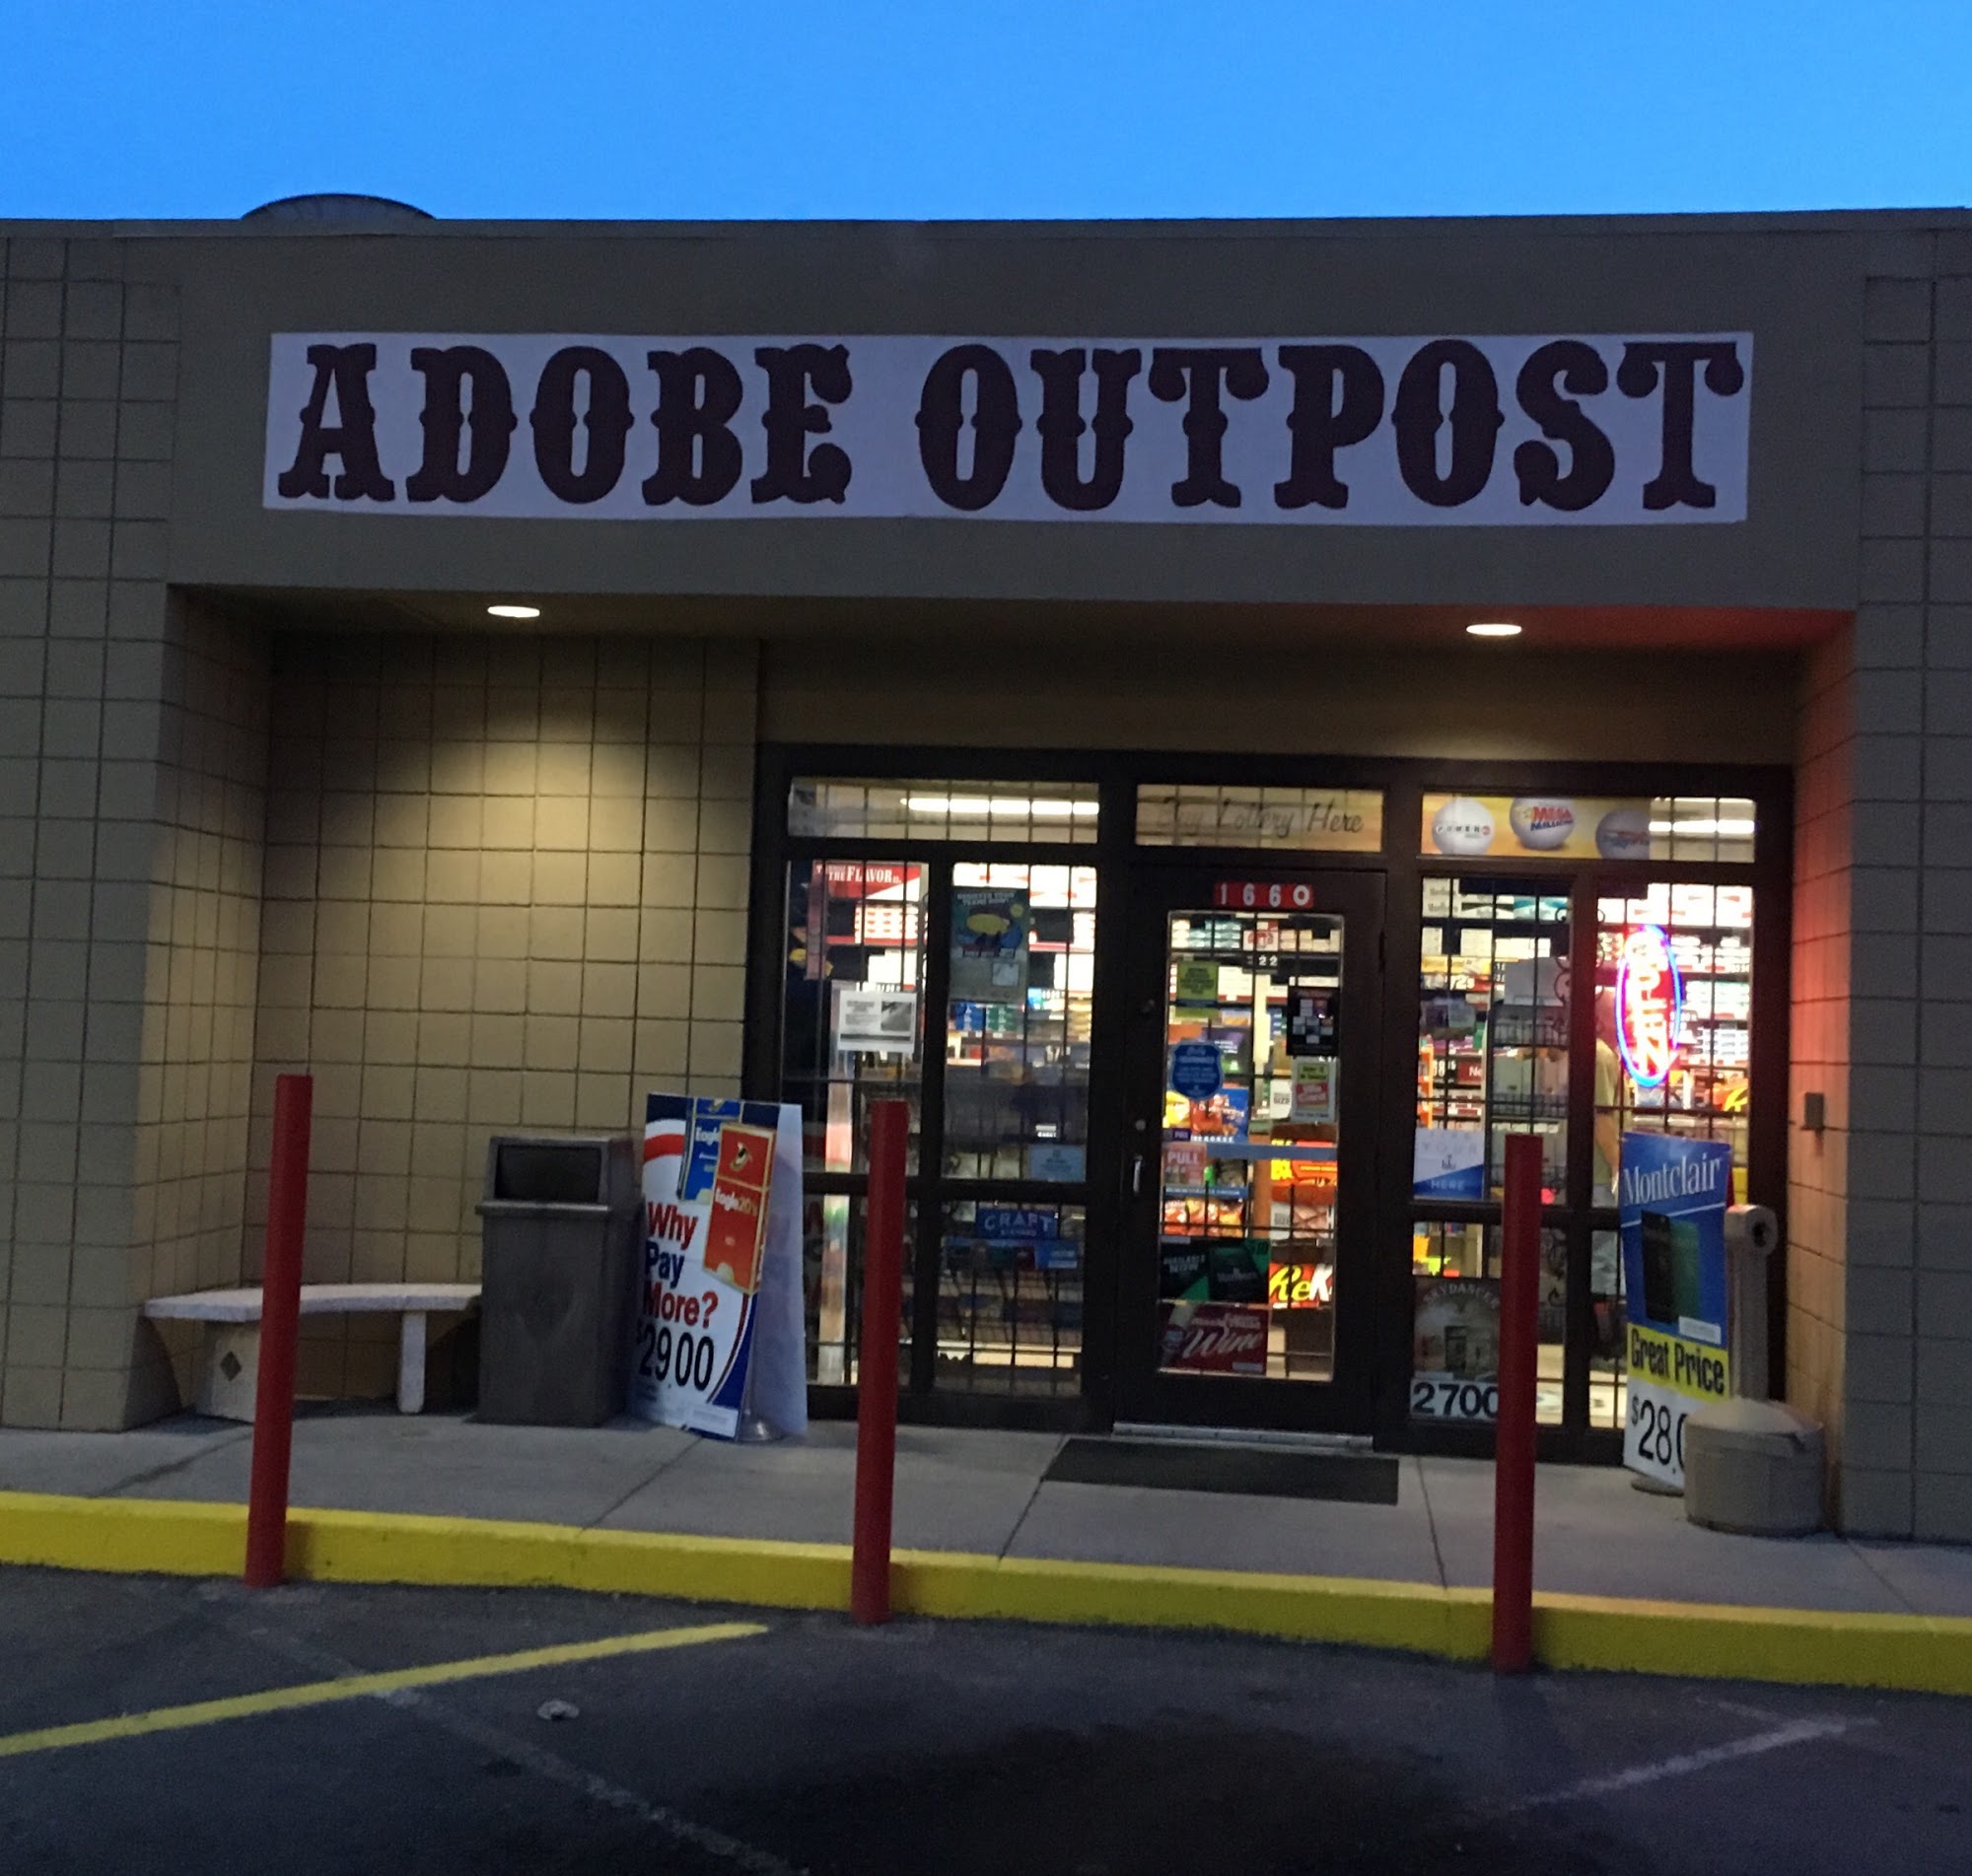 Adobe Outpost